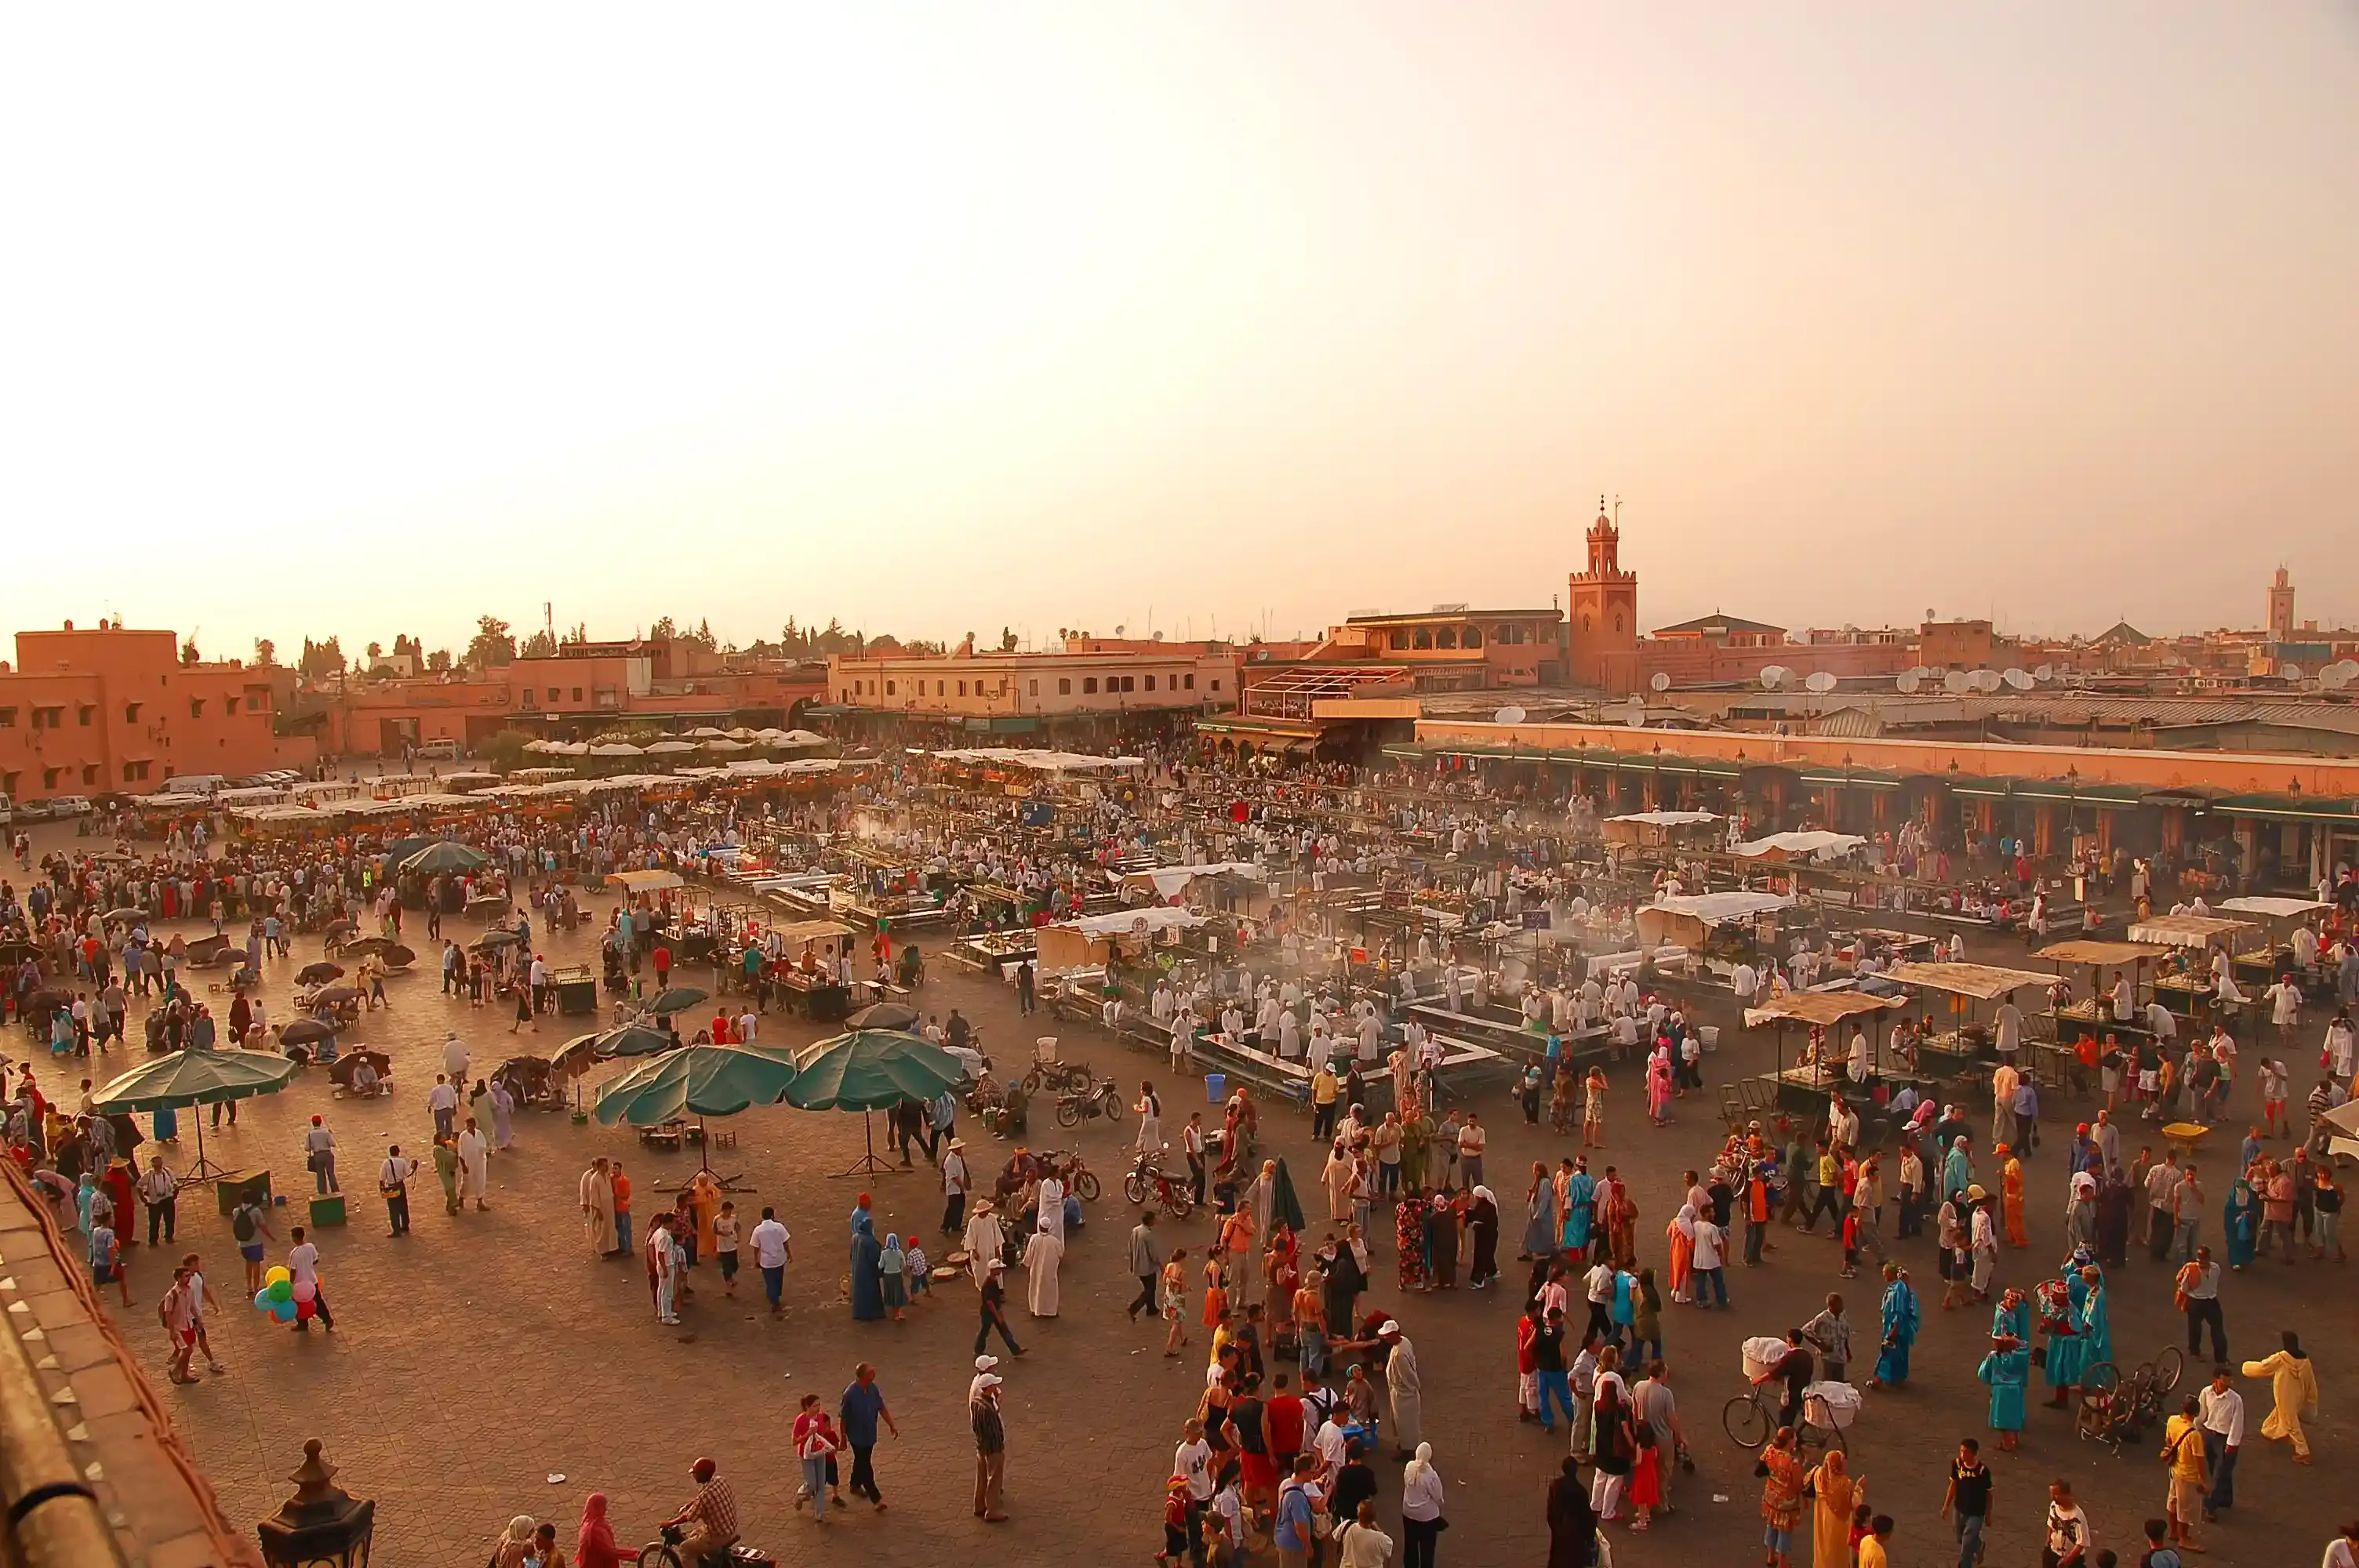 Jemaa El-Fna Square, a must-visit destination just a ten-minute walk from our guesthouse.